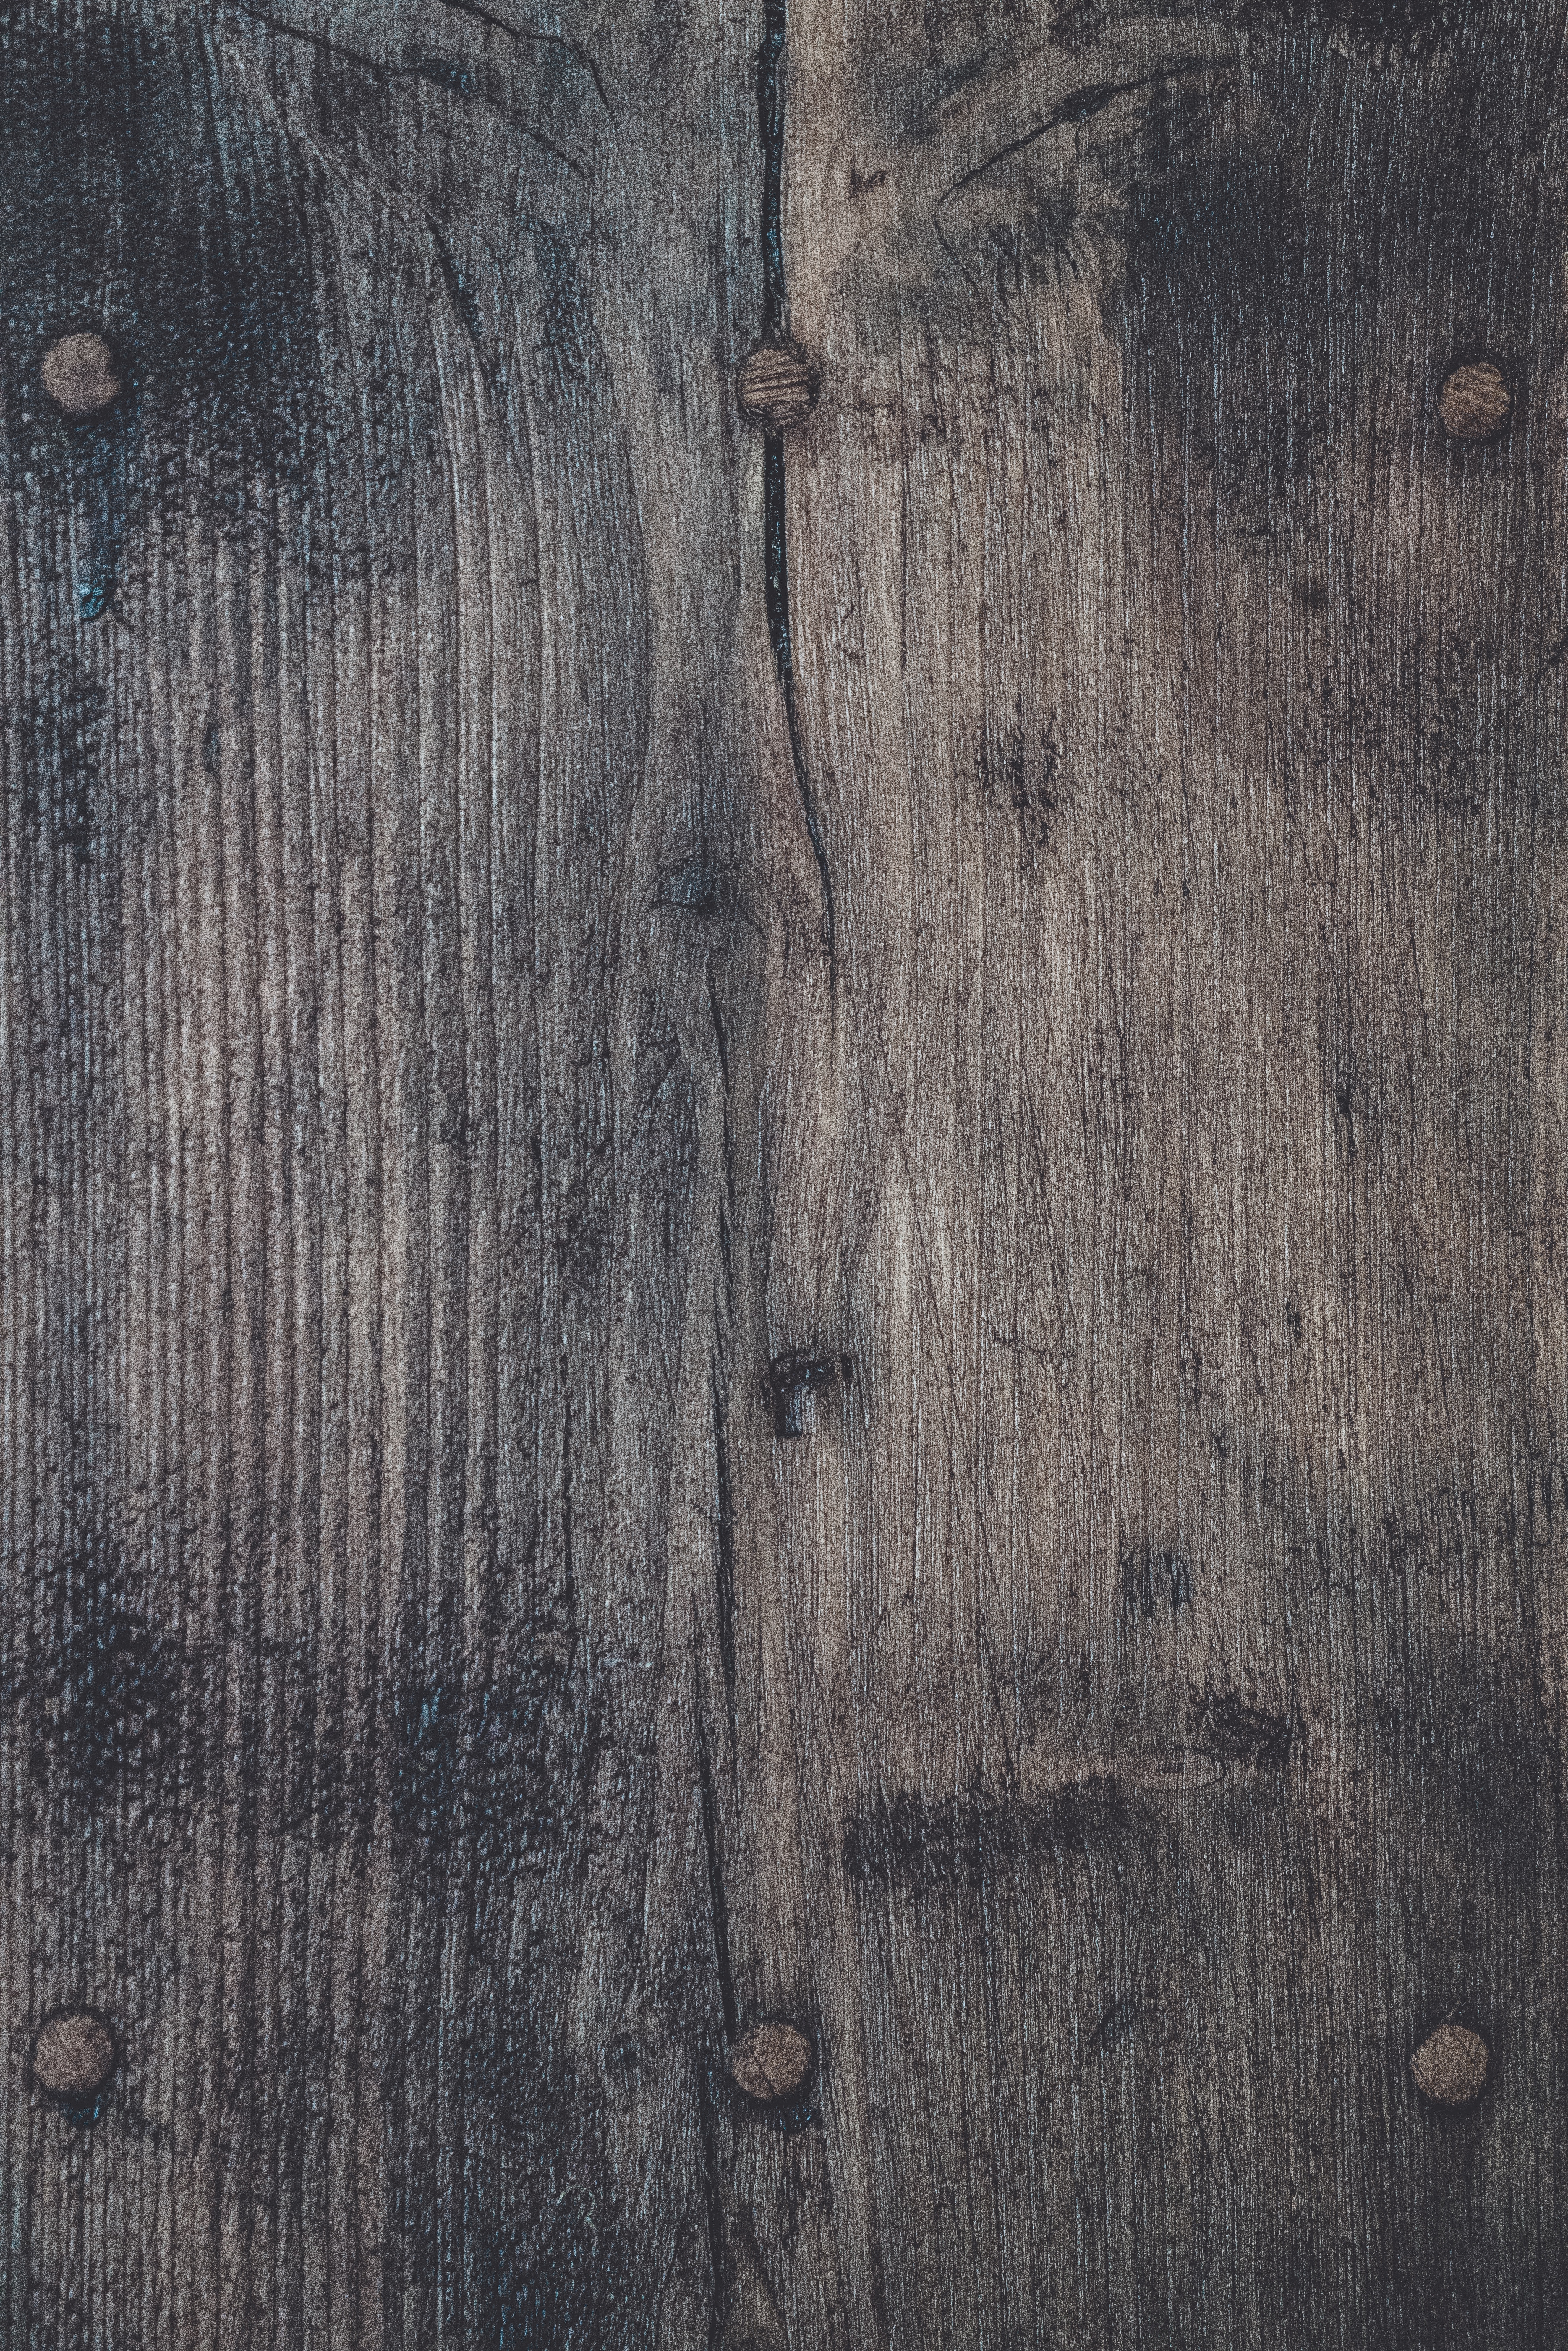 Free HD texture, wooden, textures, surface, ribbed, wood